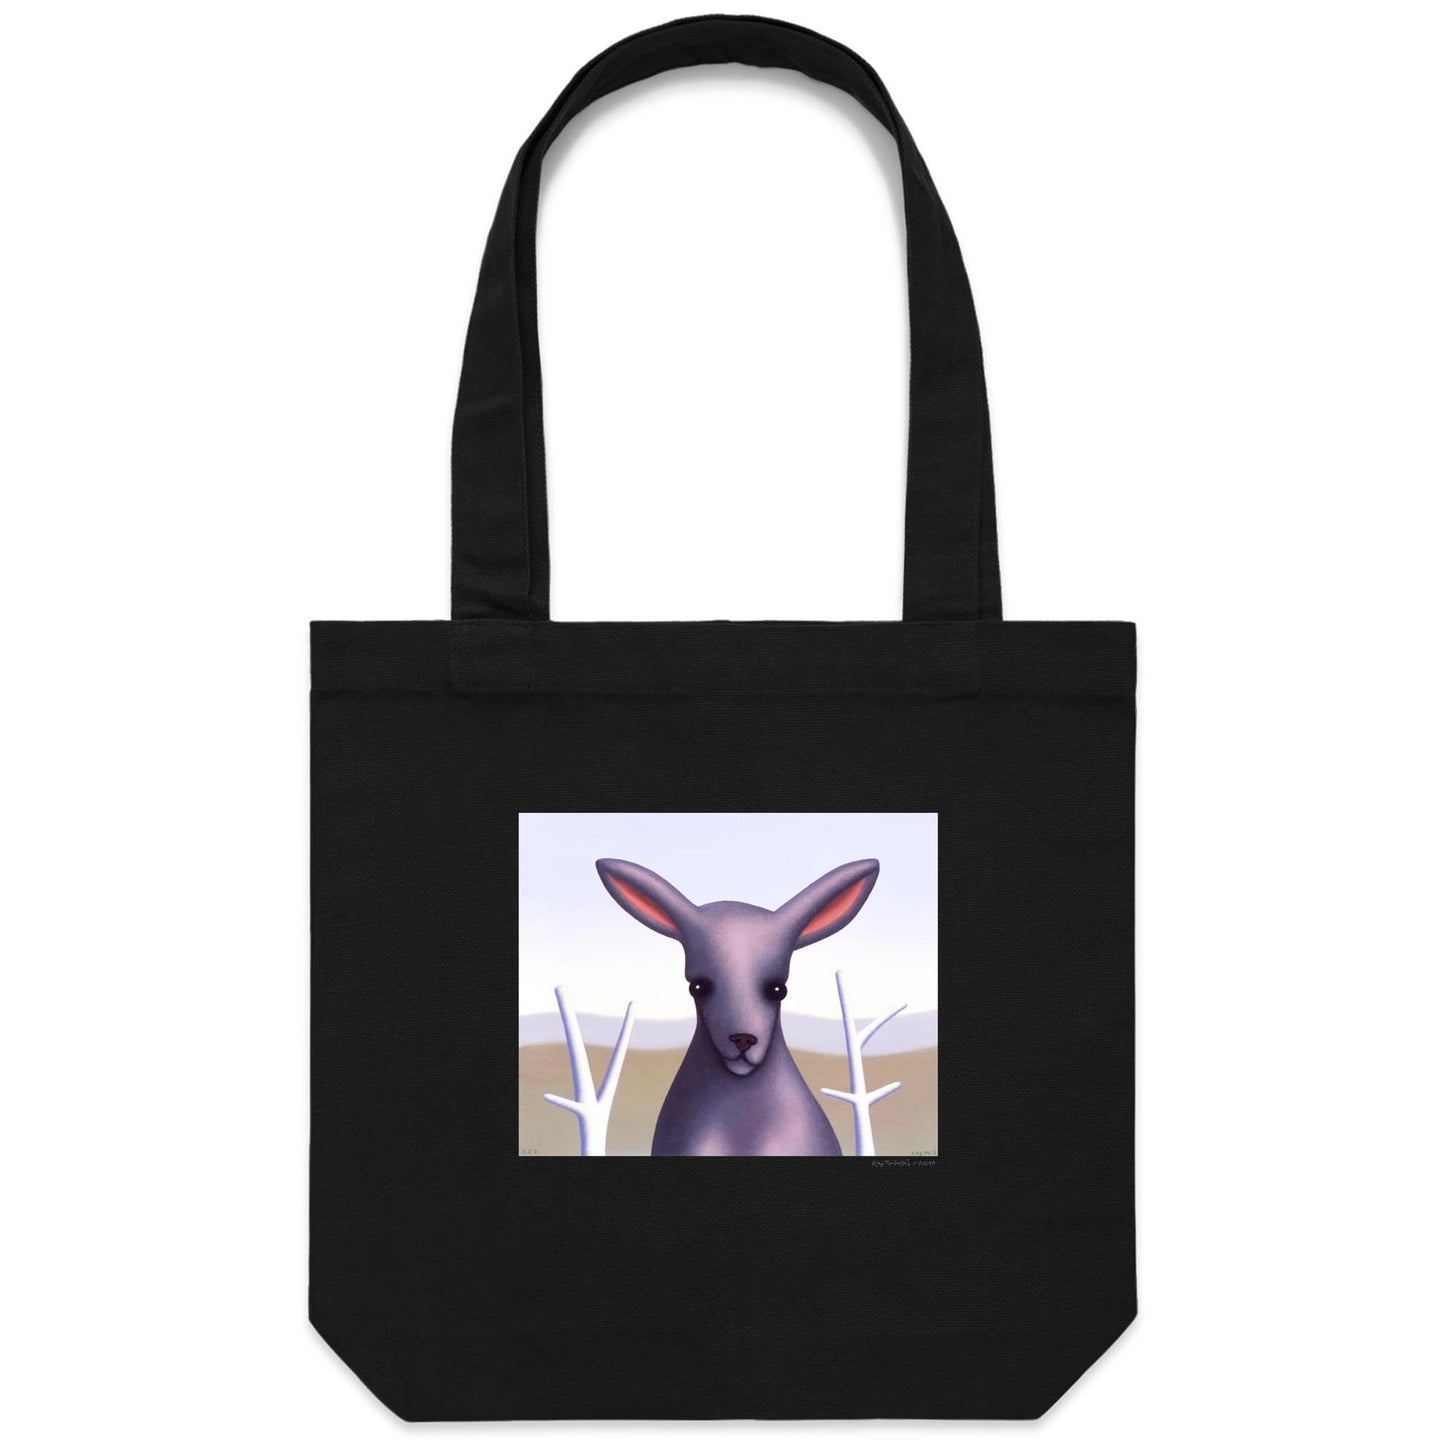 Fluffy the Slightly Pink Kangaroo Canvas Totes